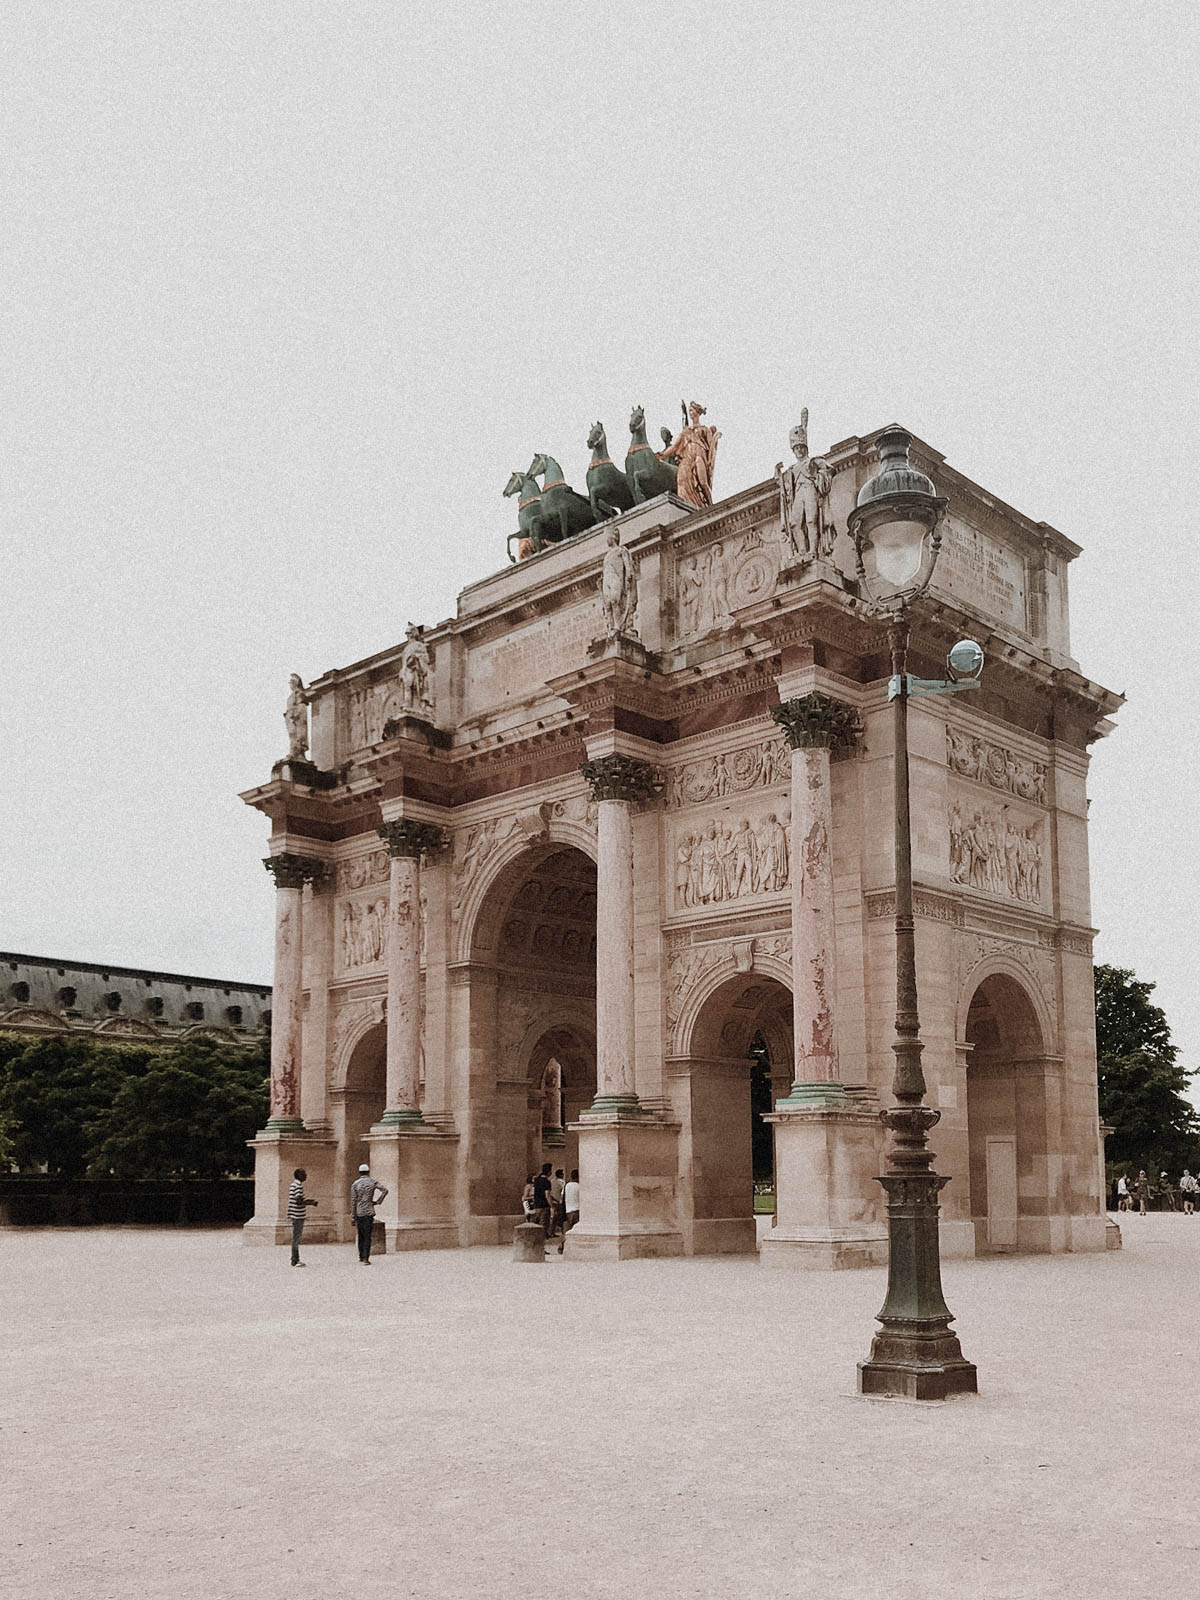 Paris France Travel Guide - European Architecture and Arches / RG Daily Blog